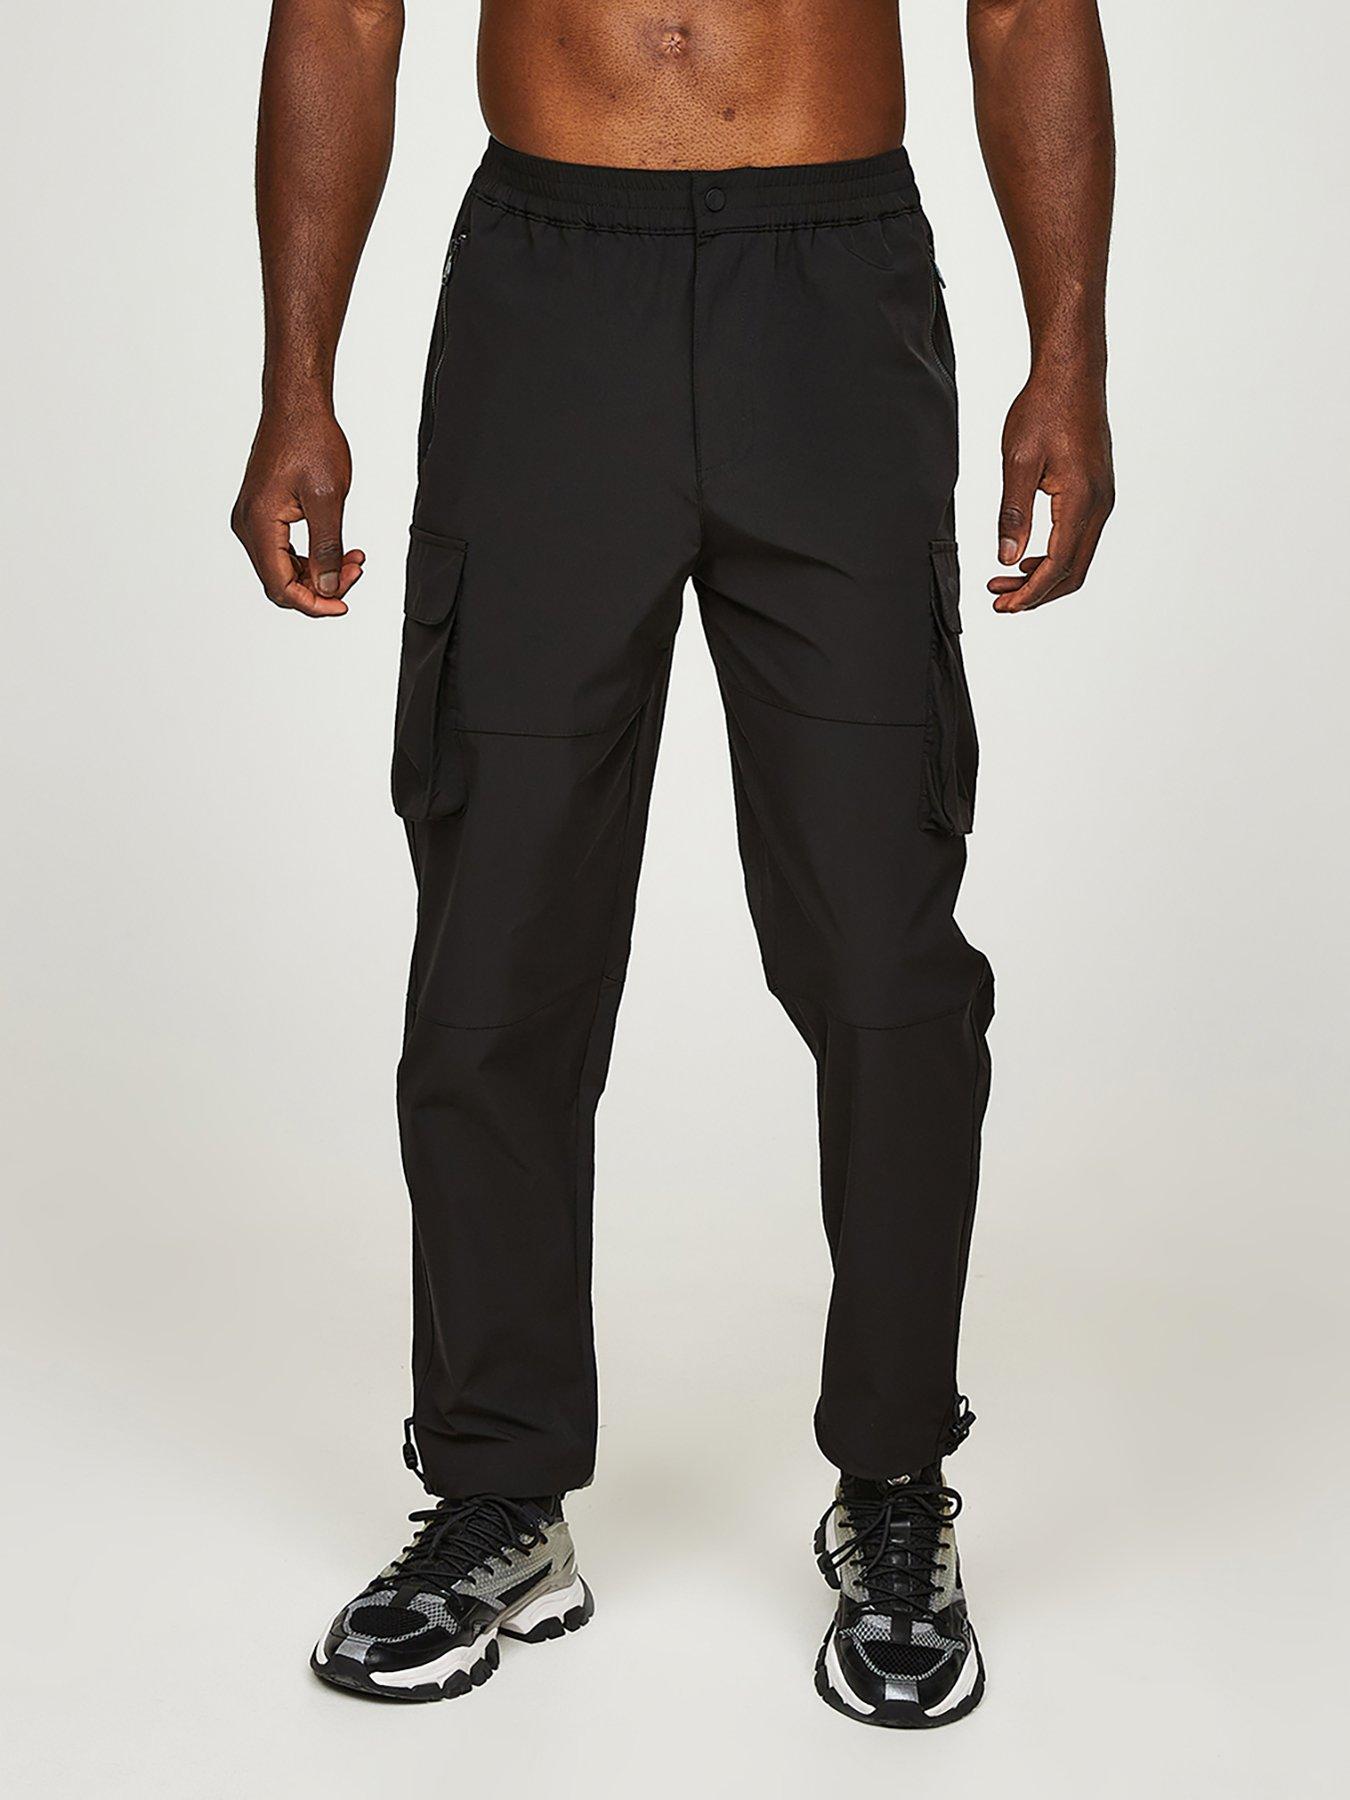 Shop Men's Cargo Pants and Casual Trousers